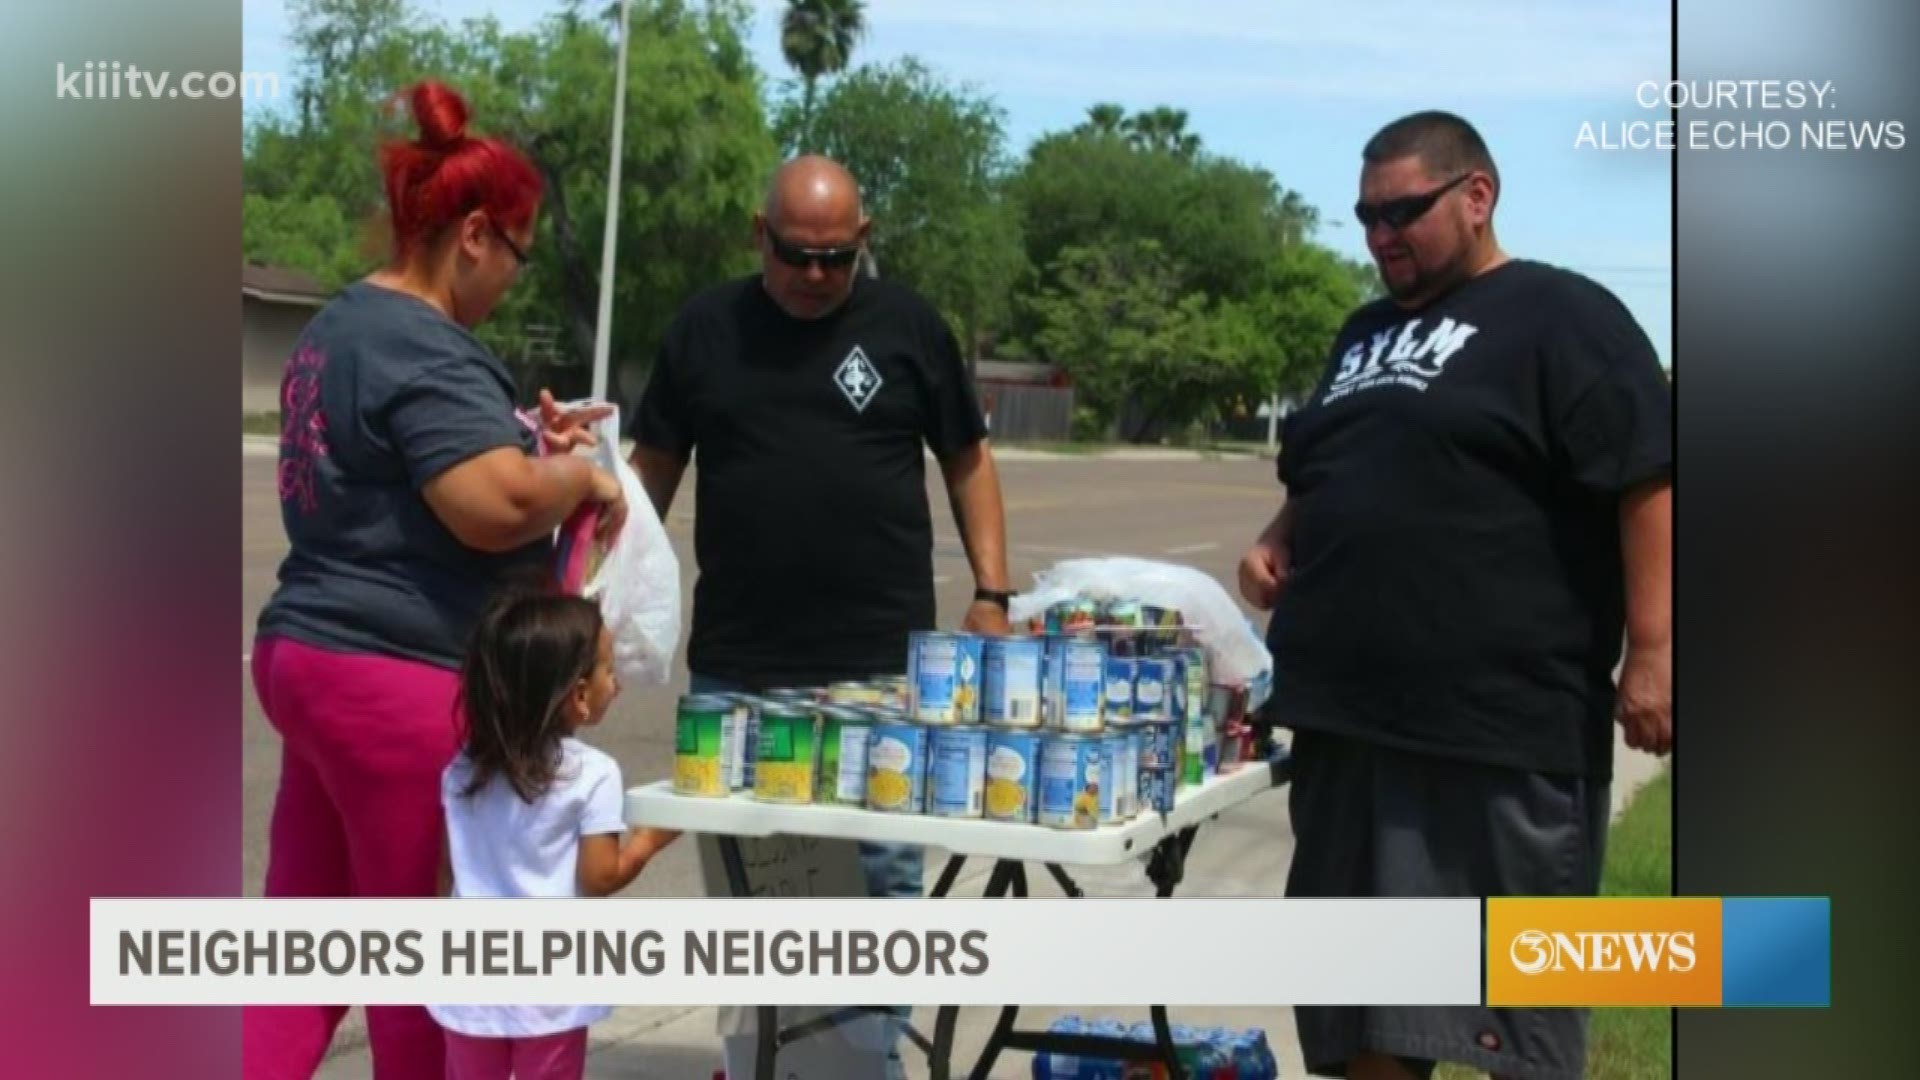 3News First Edition wants to take some time to acknowledge many of you in the Coastal Bend who are stepping up and checking on your neighbors.